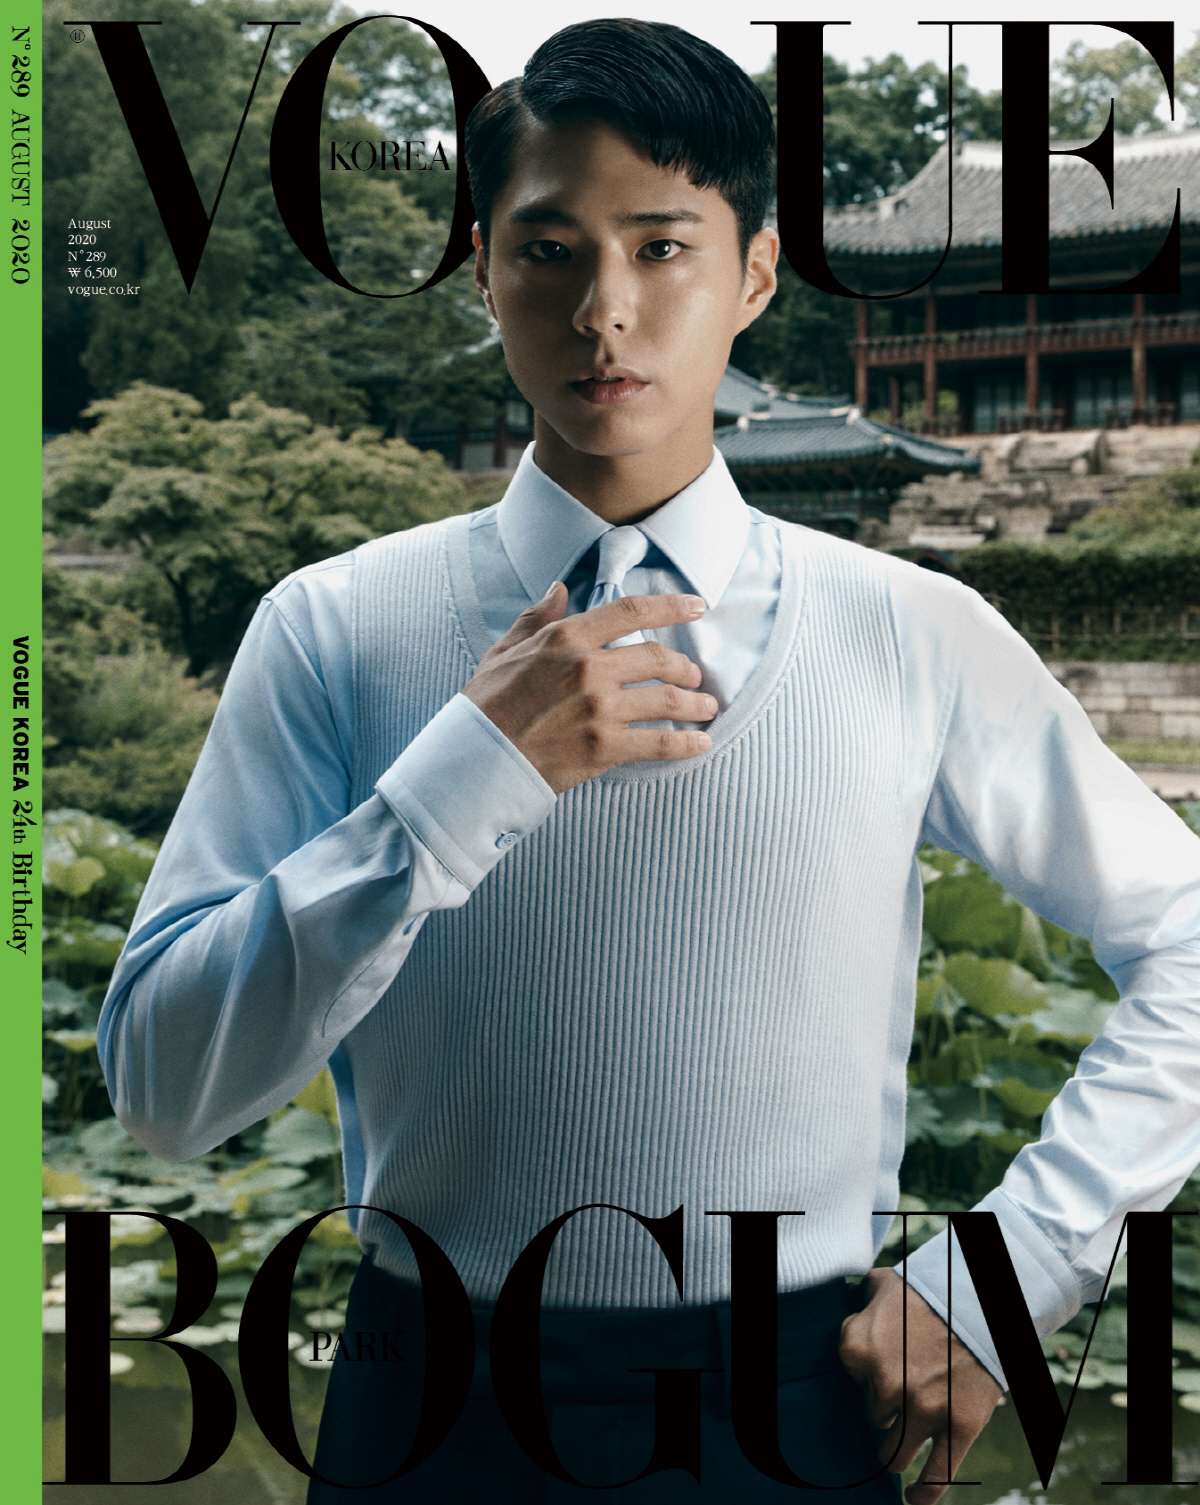 Actor Park Bo-gum has graced the cover of the first issue of the fashion magazine Vogue Koreas 24th anniversary.This film, which was held at Changdeokgung, created an emotional visual that seemed to see a movie on the other hand, combining the premiere beauty of the palace and the restrained masculine beauty of Actor Park Bo-gum.Park Bo-gum is said to have maximized the perfection of the picture by overwhelming his gaze with his charisma by freely digesting various styles.In addition, interviews will be published with honest stories about the thoughts and values ​​of twenty-eight Park Bo-gum.According to the official, Park Bo-gum Actors proposal to promote the beauty of Korea has made it to Changdeokgung. Park Bo-gum is a warm and caring inner owner, but he is more cool professional than anyone else in his work. The interview with the picture of Vogue Korea was confirmed in Korea, Taiwan, Thailand, Hong Kong edition Vogue and Chinese edition Vogue ME, and proved the Korean wave power of Park Bo-gum, which captivated Asia.The August issue of Vogue Korea, which includes interviews with Park Bo-gum Actors pictures, will be published on July 20.